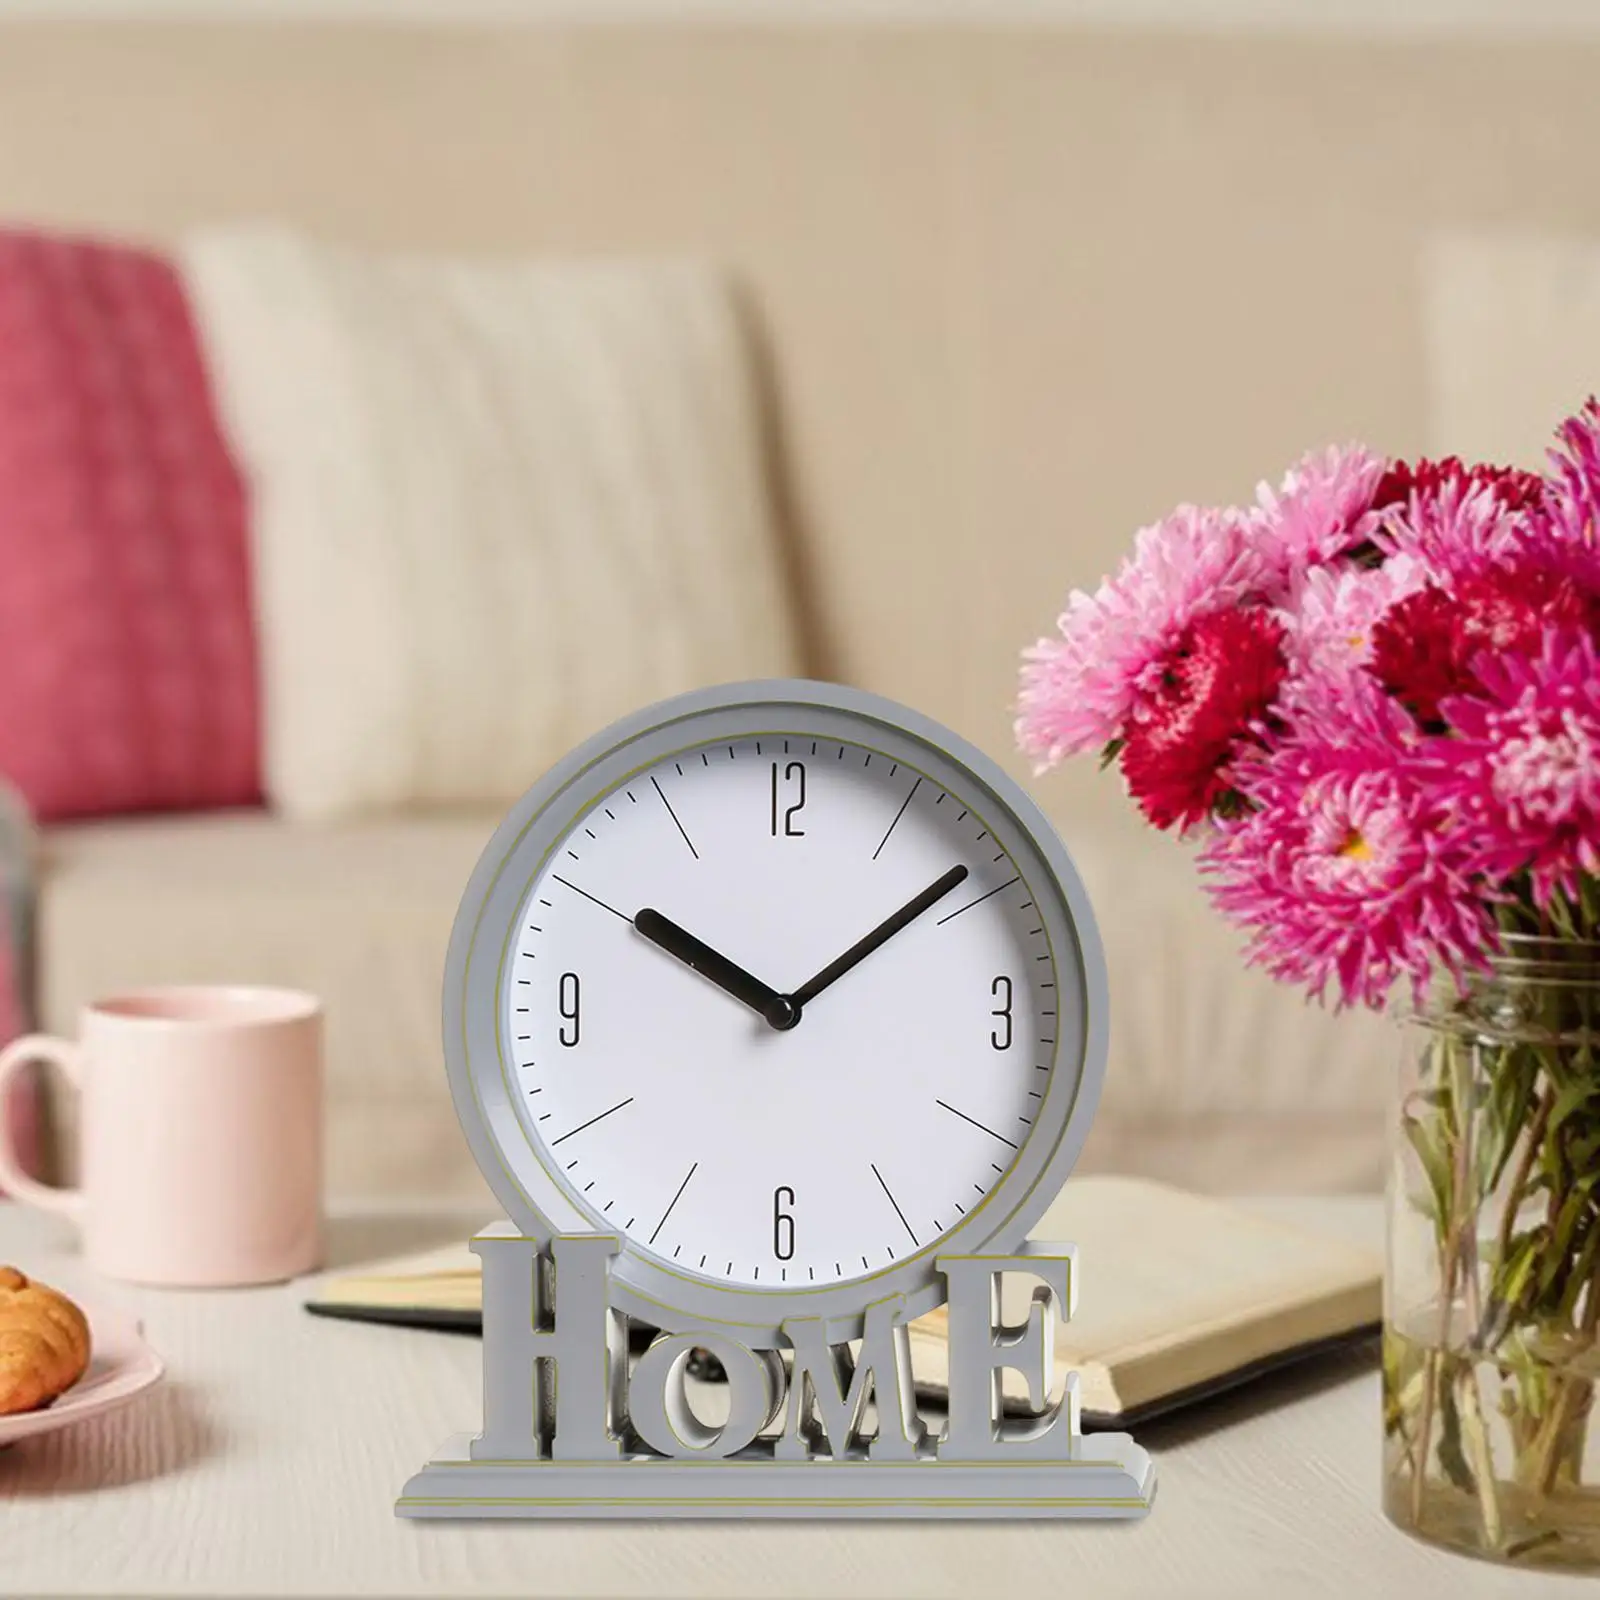 Vintage Style Desk Clock Non Ticking Decorative for Mantel Reading Mantel for